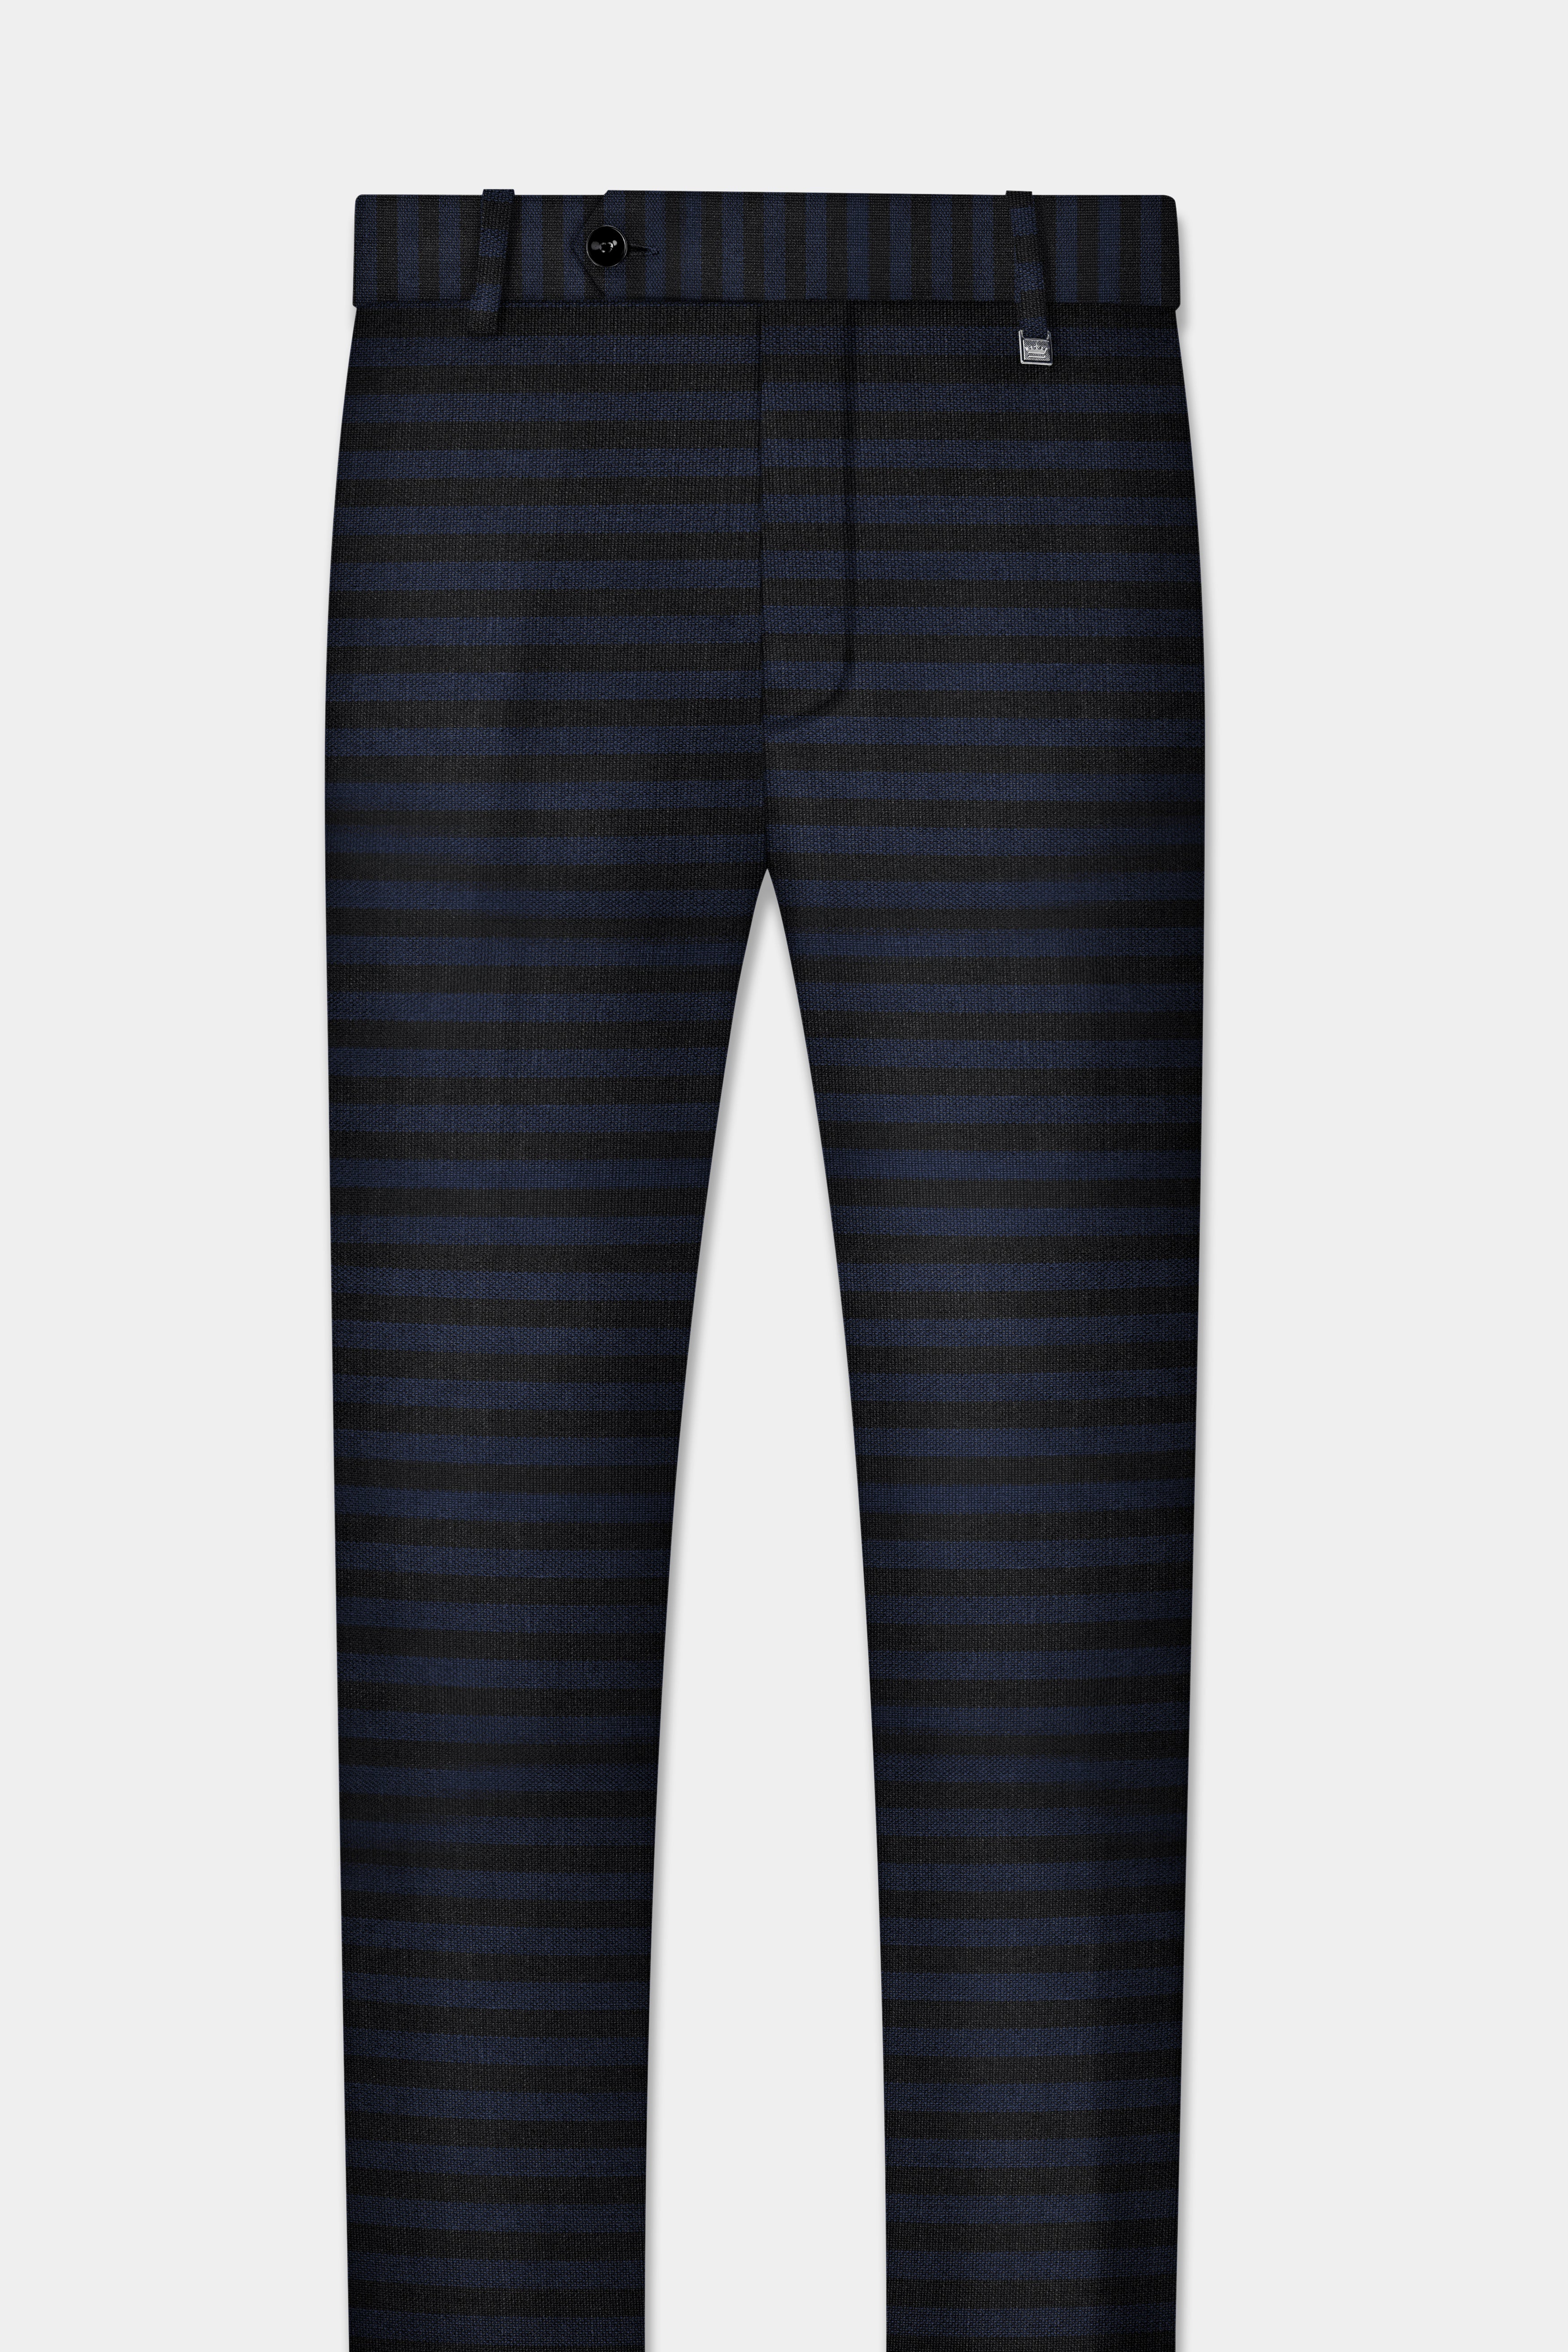 Mirage Blue and Black Striped Wool Blend Pant